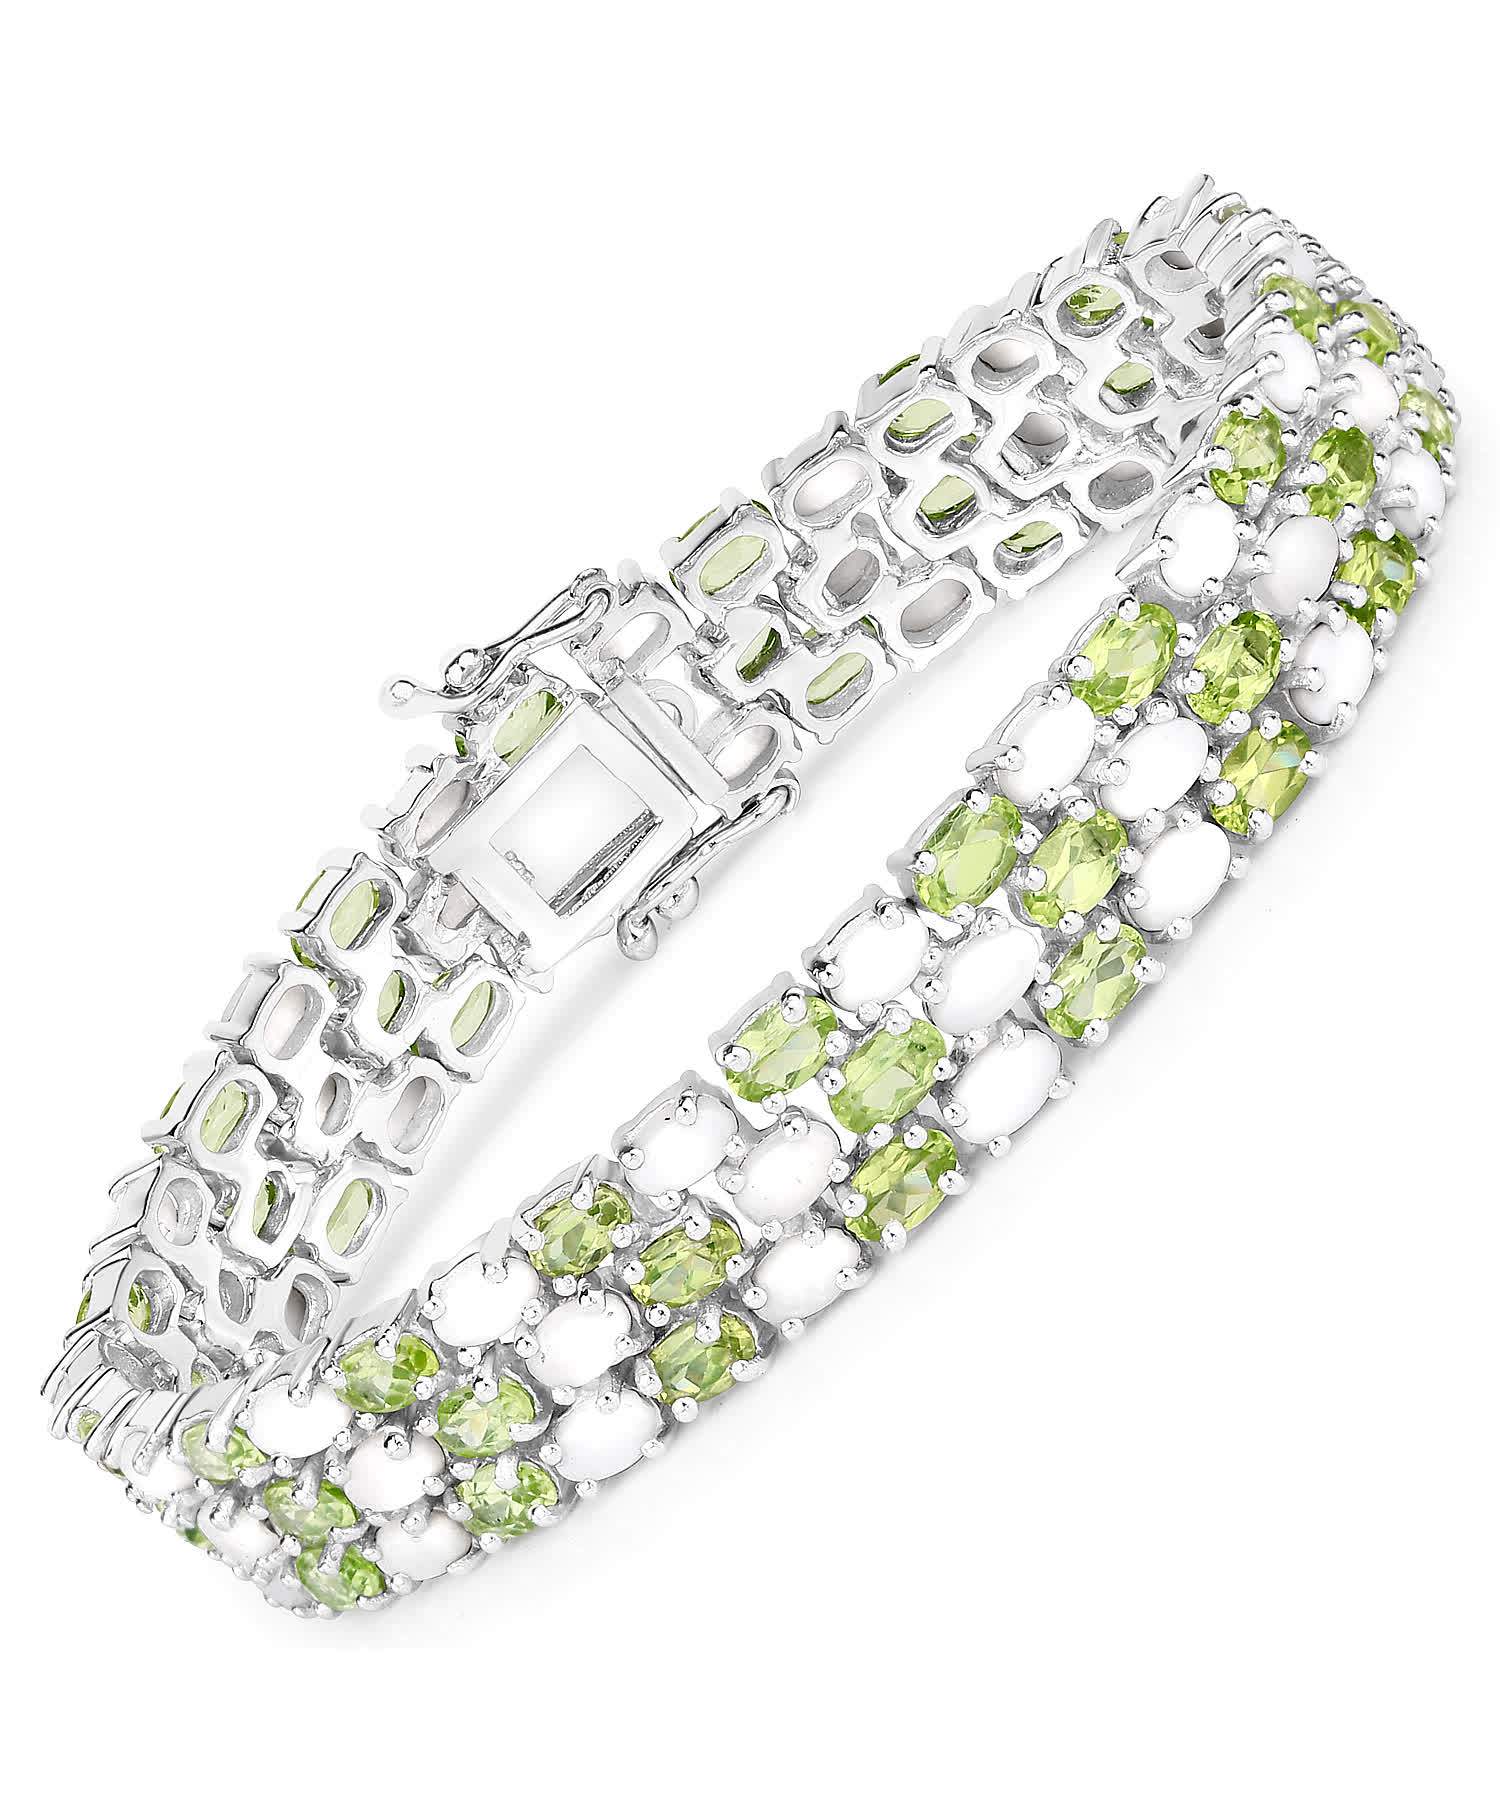 19.73ctw Natural Peridot and Opal Rhodium Plated 925 Sterling Silver Link Bracelet View 1